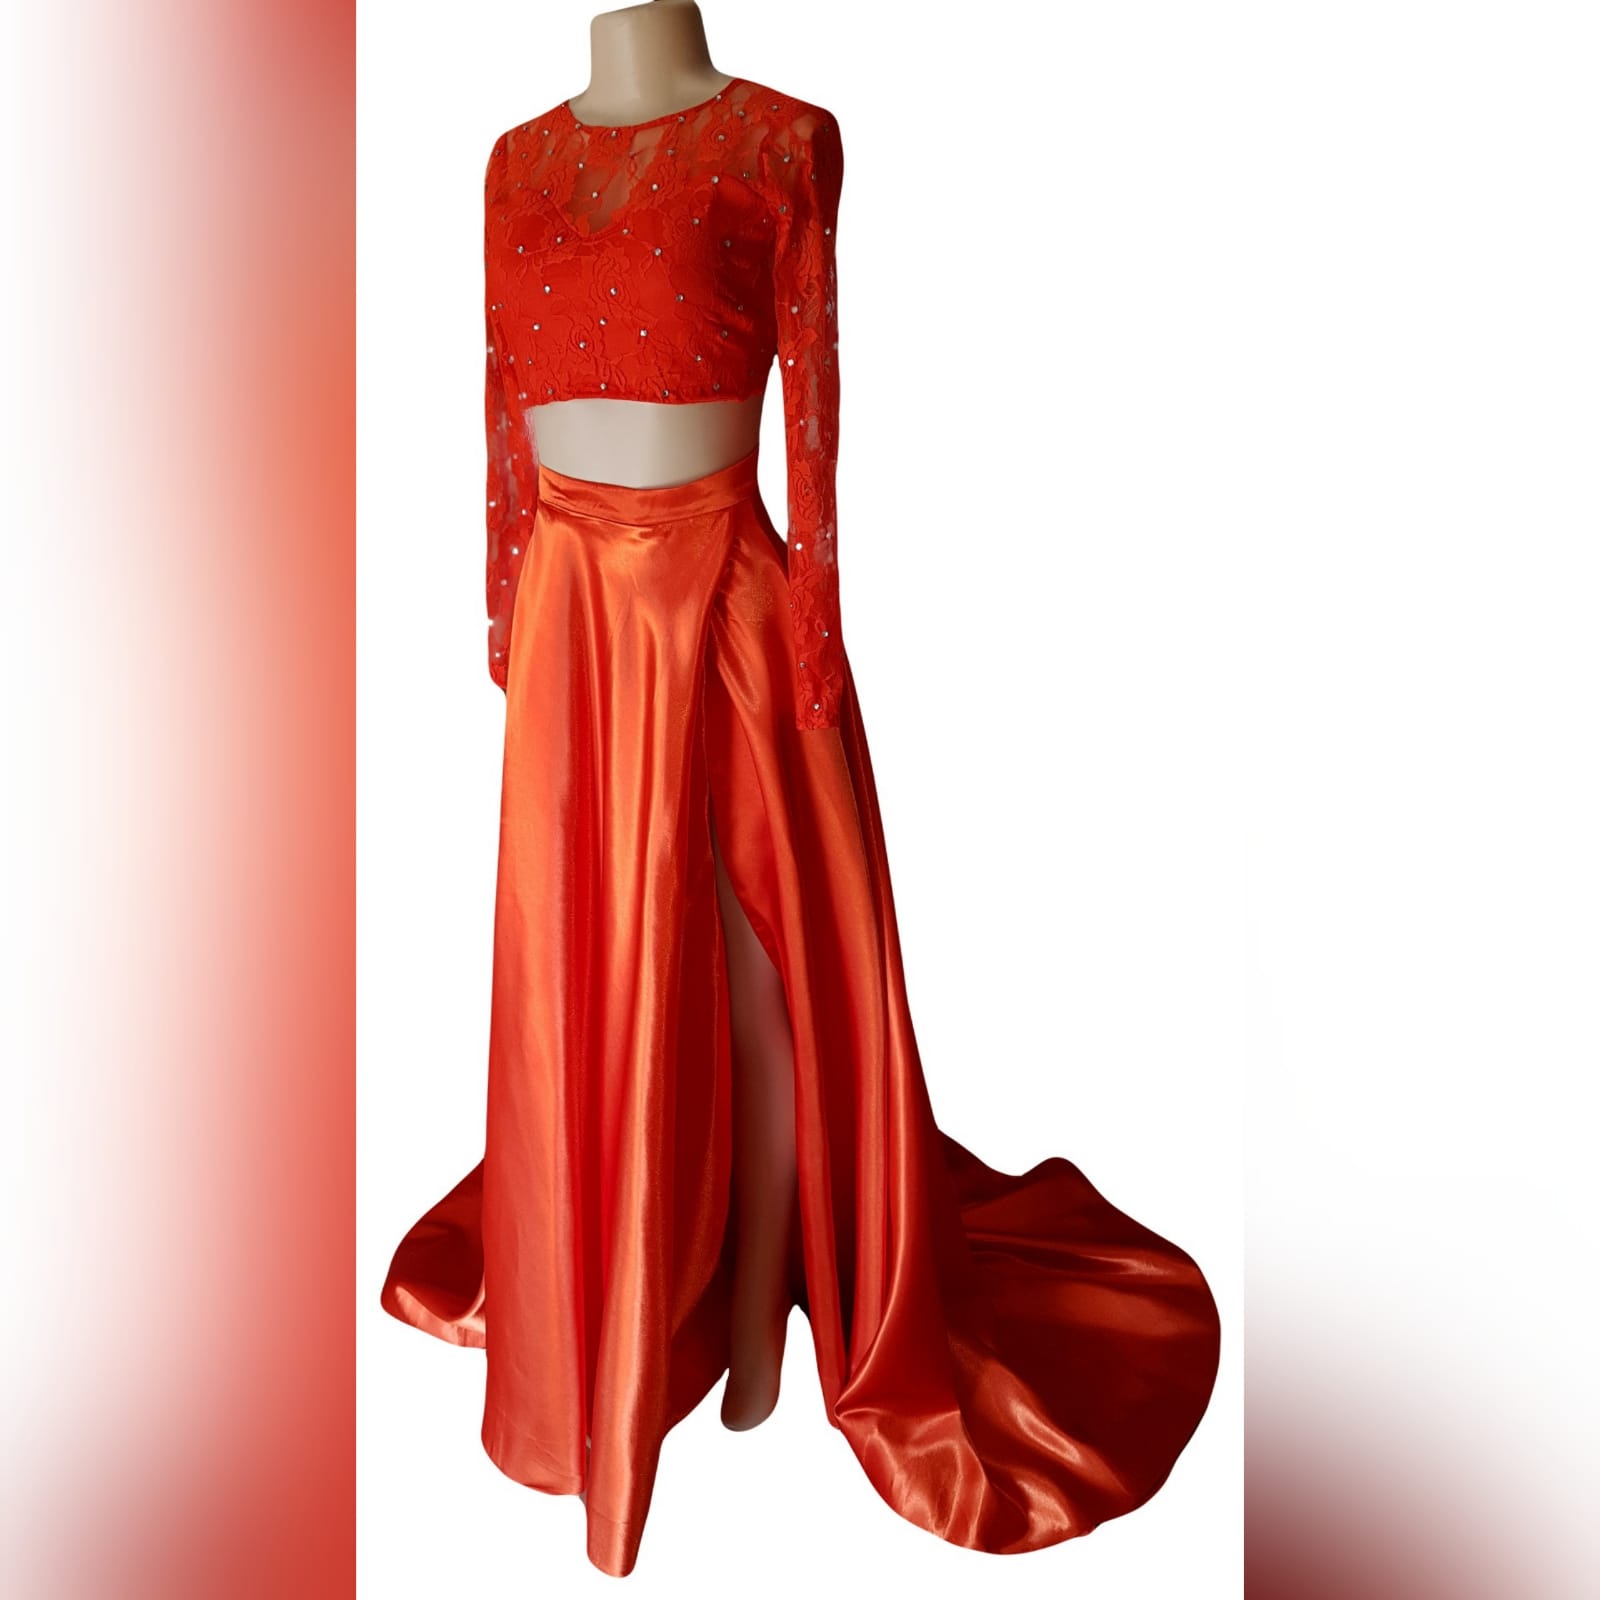 2 piece orange prom dress with a lace crop top 11 2 piece orange prom dress with a lace crop top detailed with silver beads. Flowy, shiny skirt with crossed slit and long train.